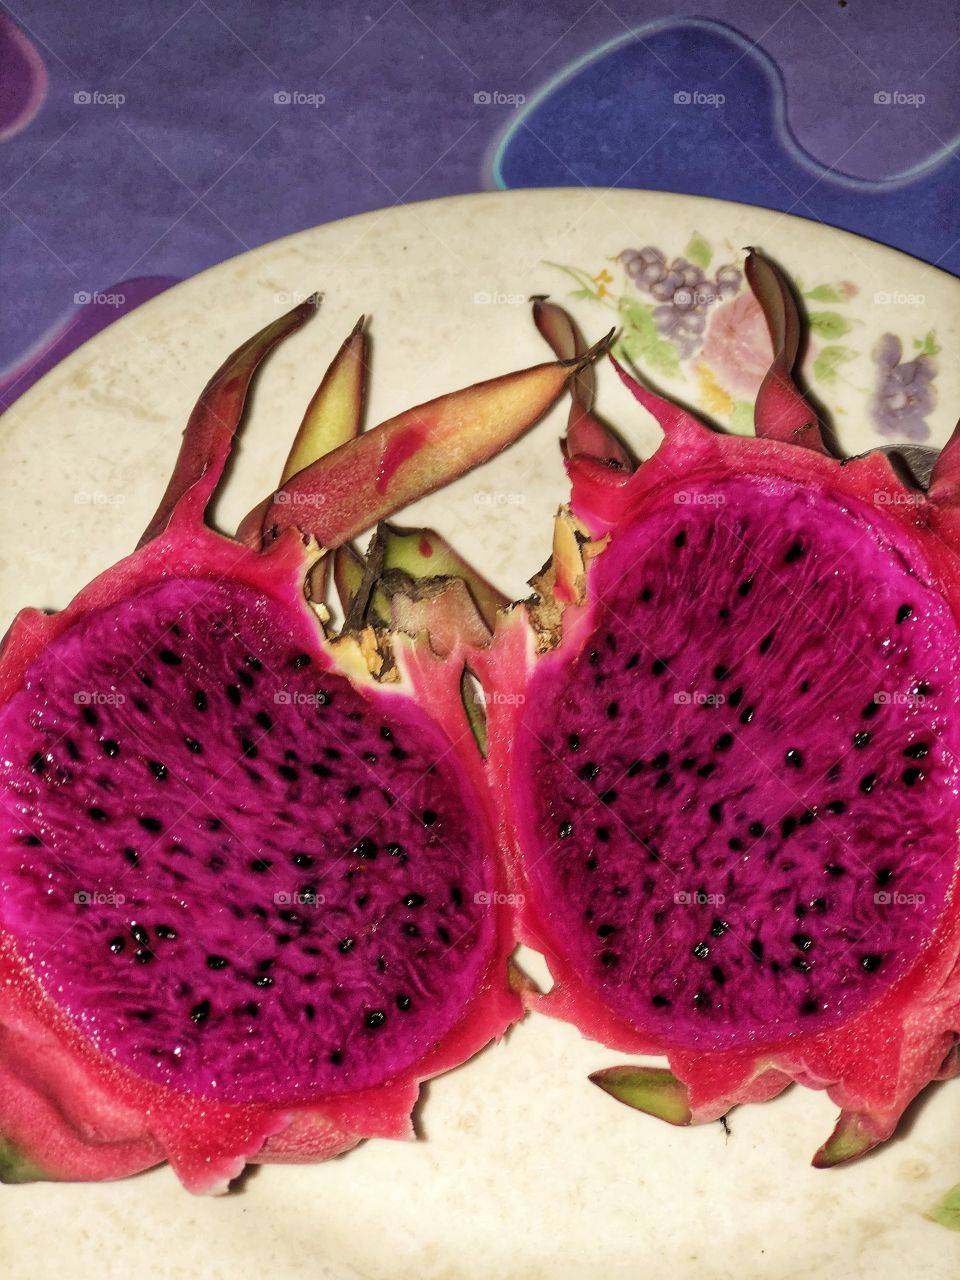 Fresh dragon fruit from my aunt's backyard! It's good for the health! Dragon fruit is low in calories but packed with essential vitamins and minerals. It's yummy and sweet! 😋